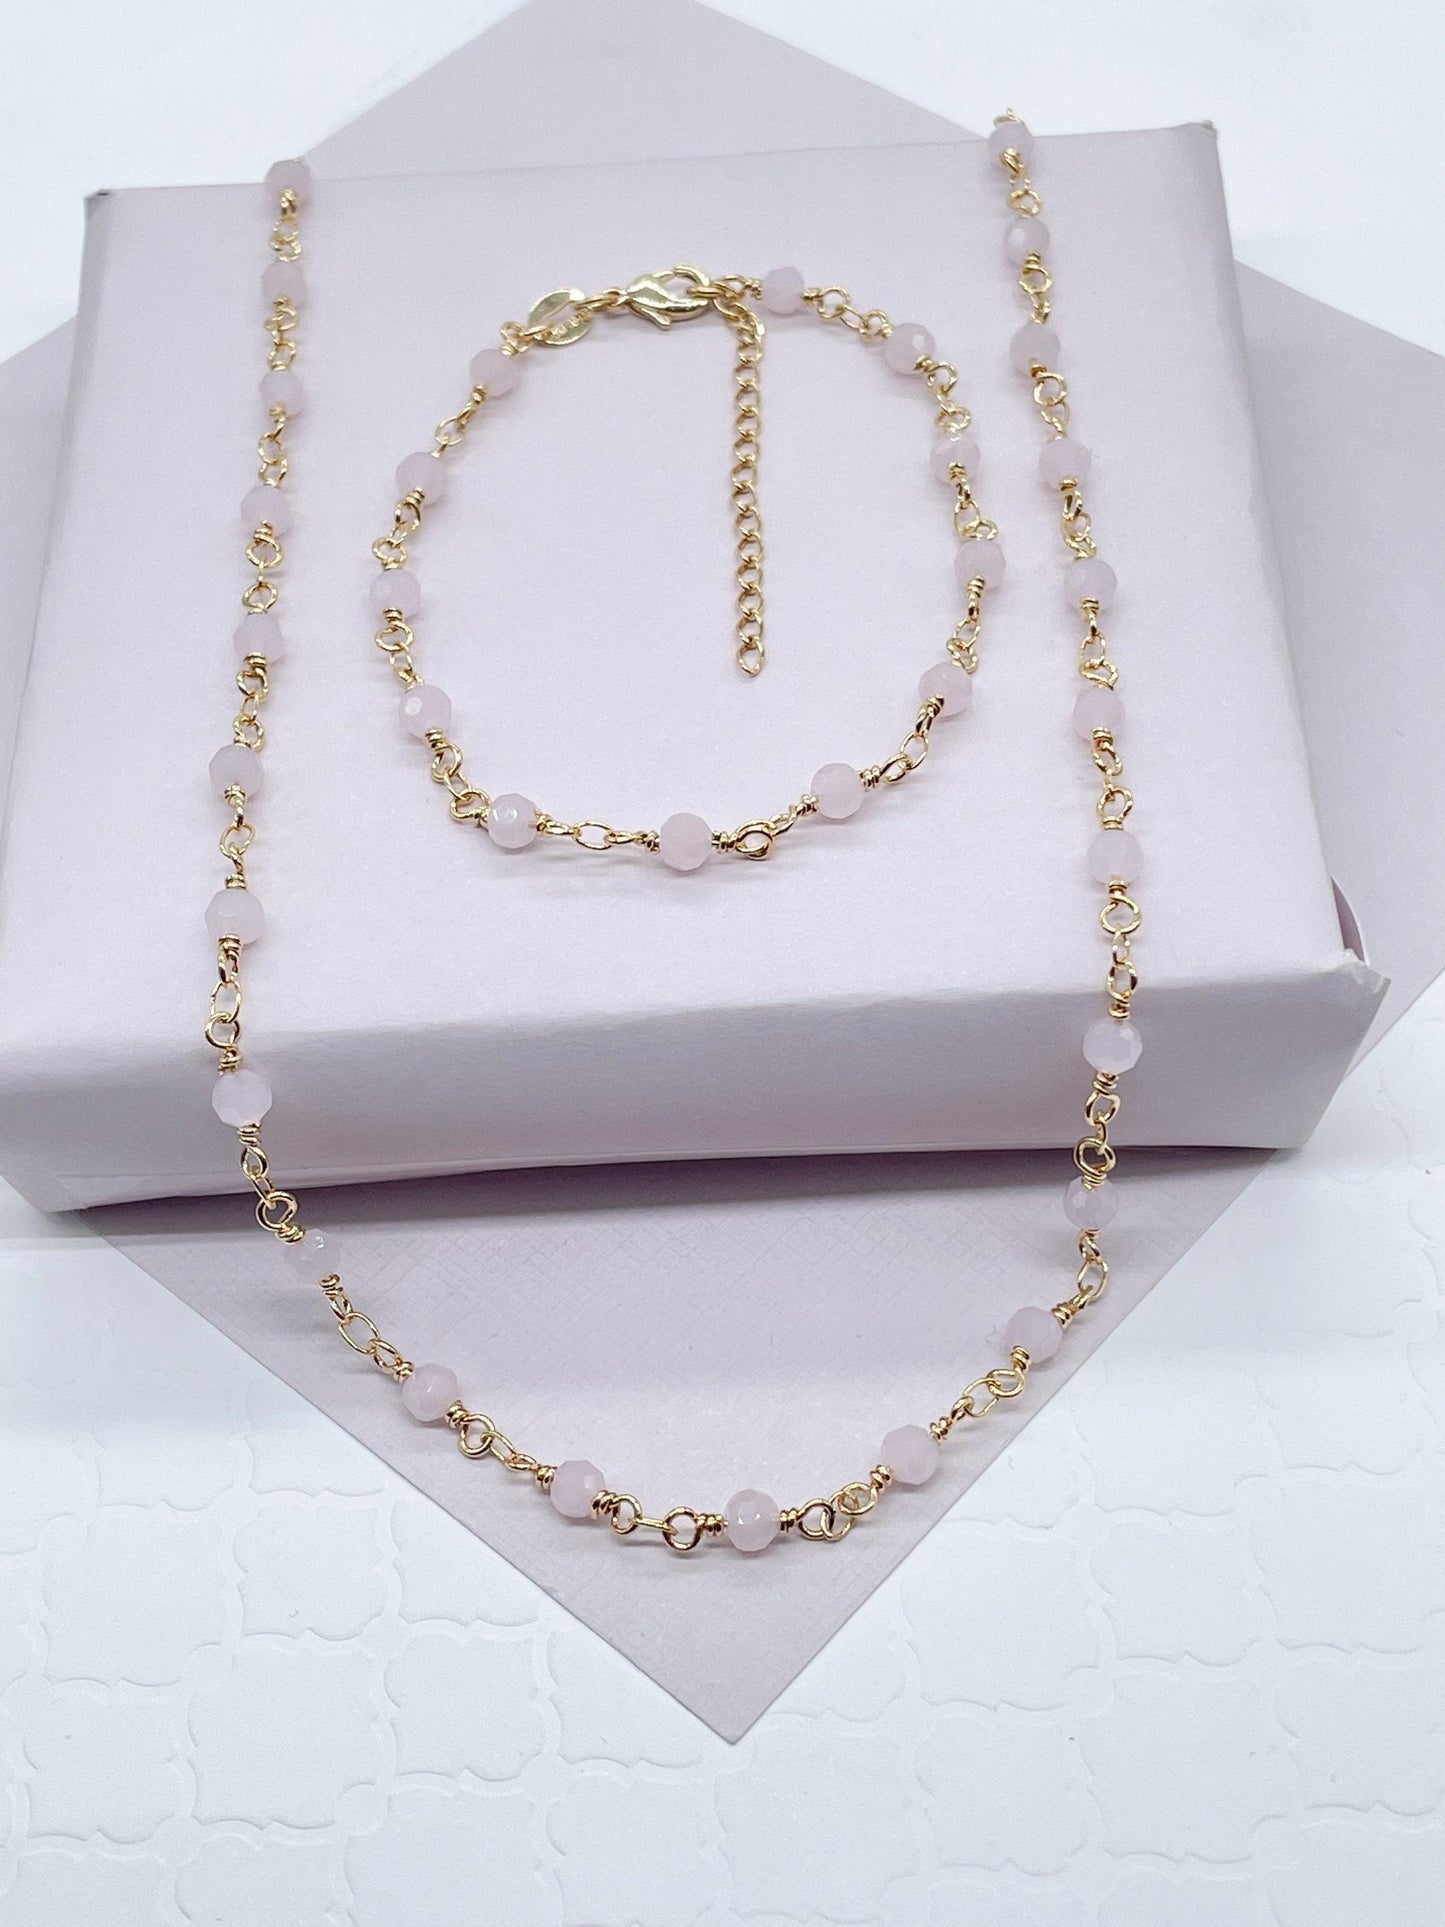 18k Gold Layered Baby Pink Bead Bracelet Necklace Or Jewelry Set, Delicate Beaded